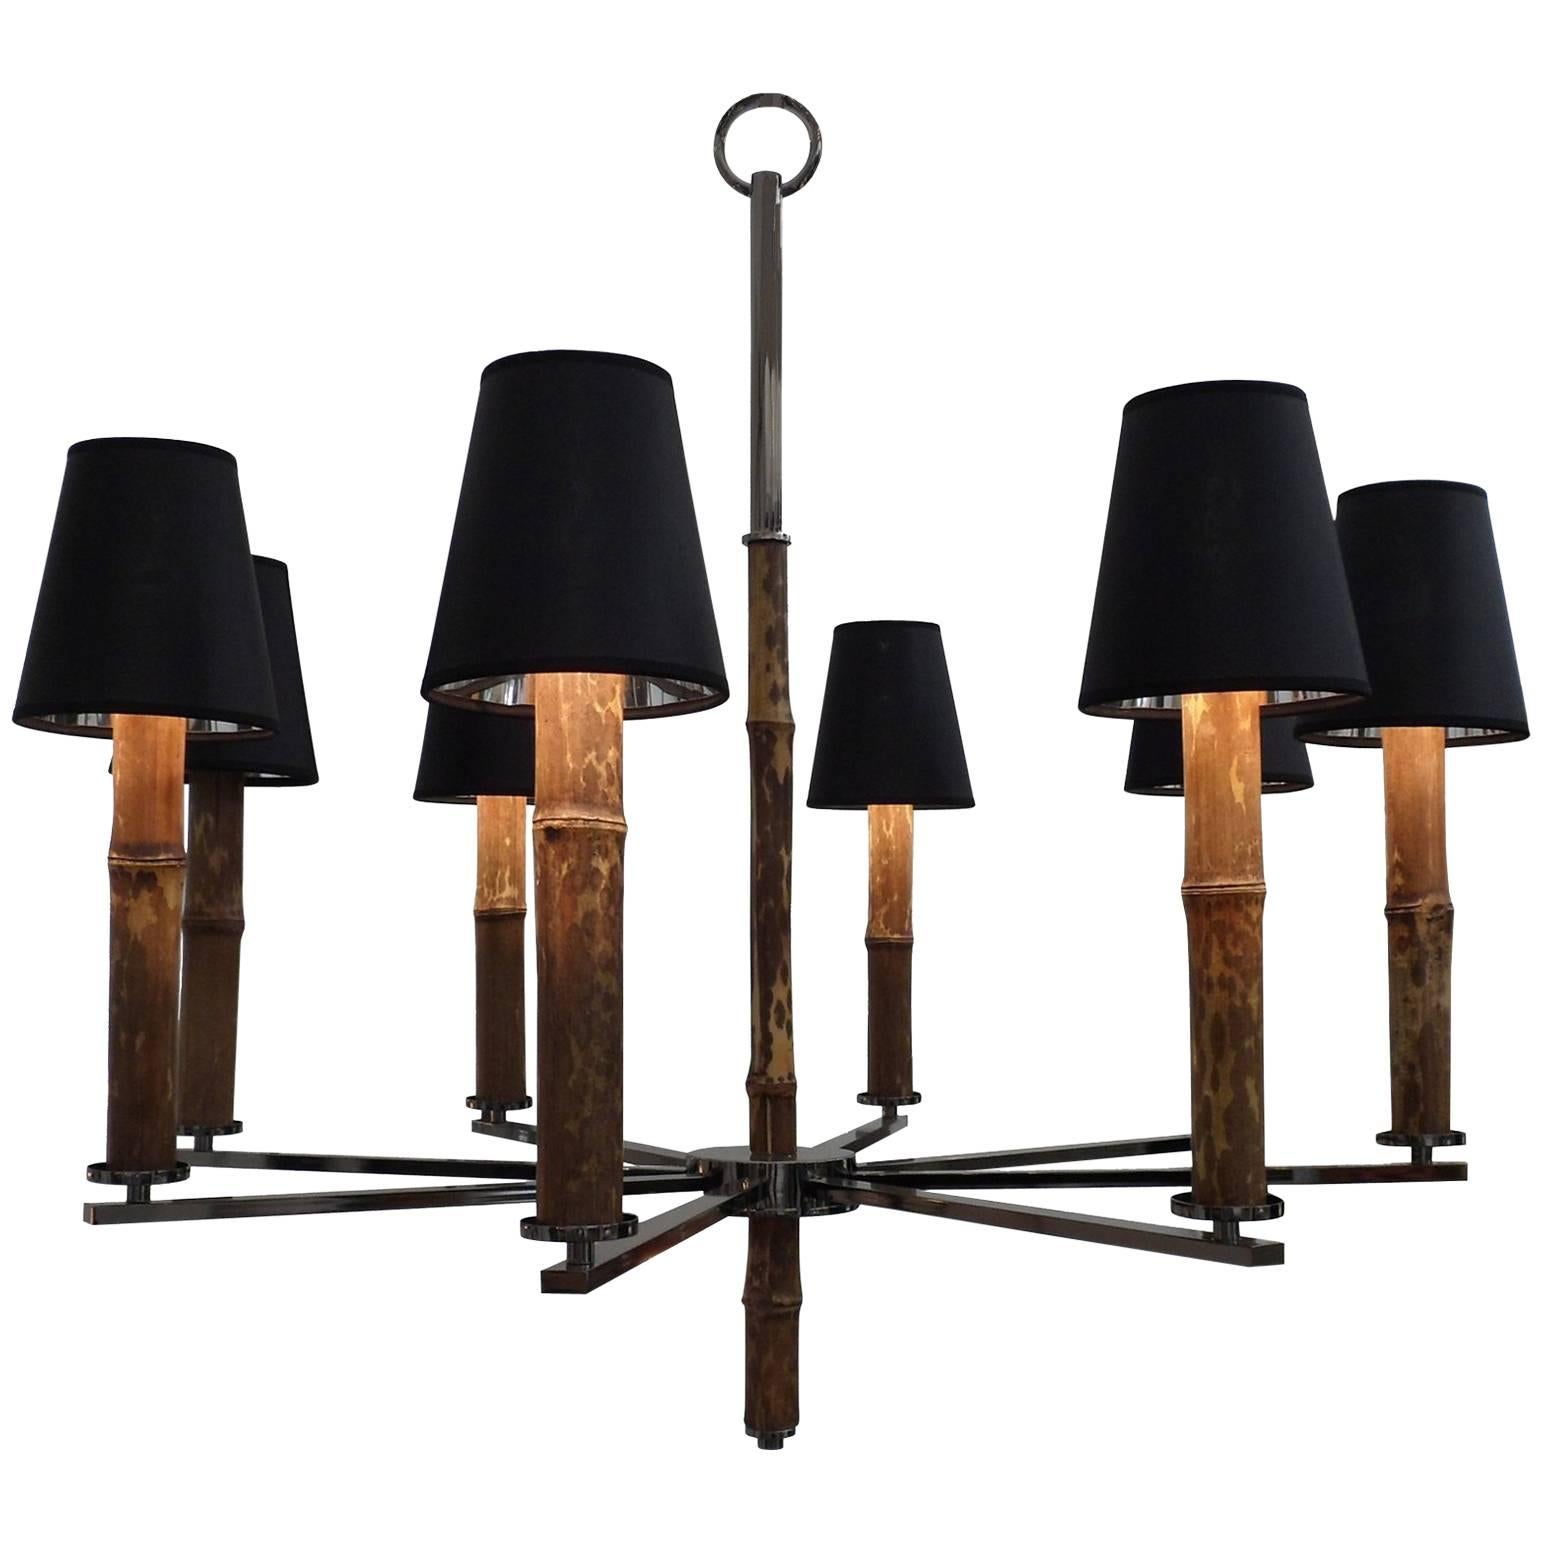 Six-Arm Nickeled Brass and Bamboo Chandelier "Grove" Made in Italy For Sale